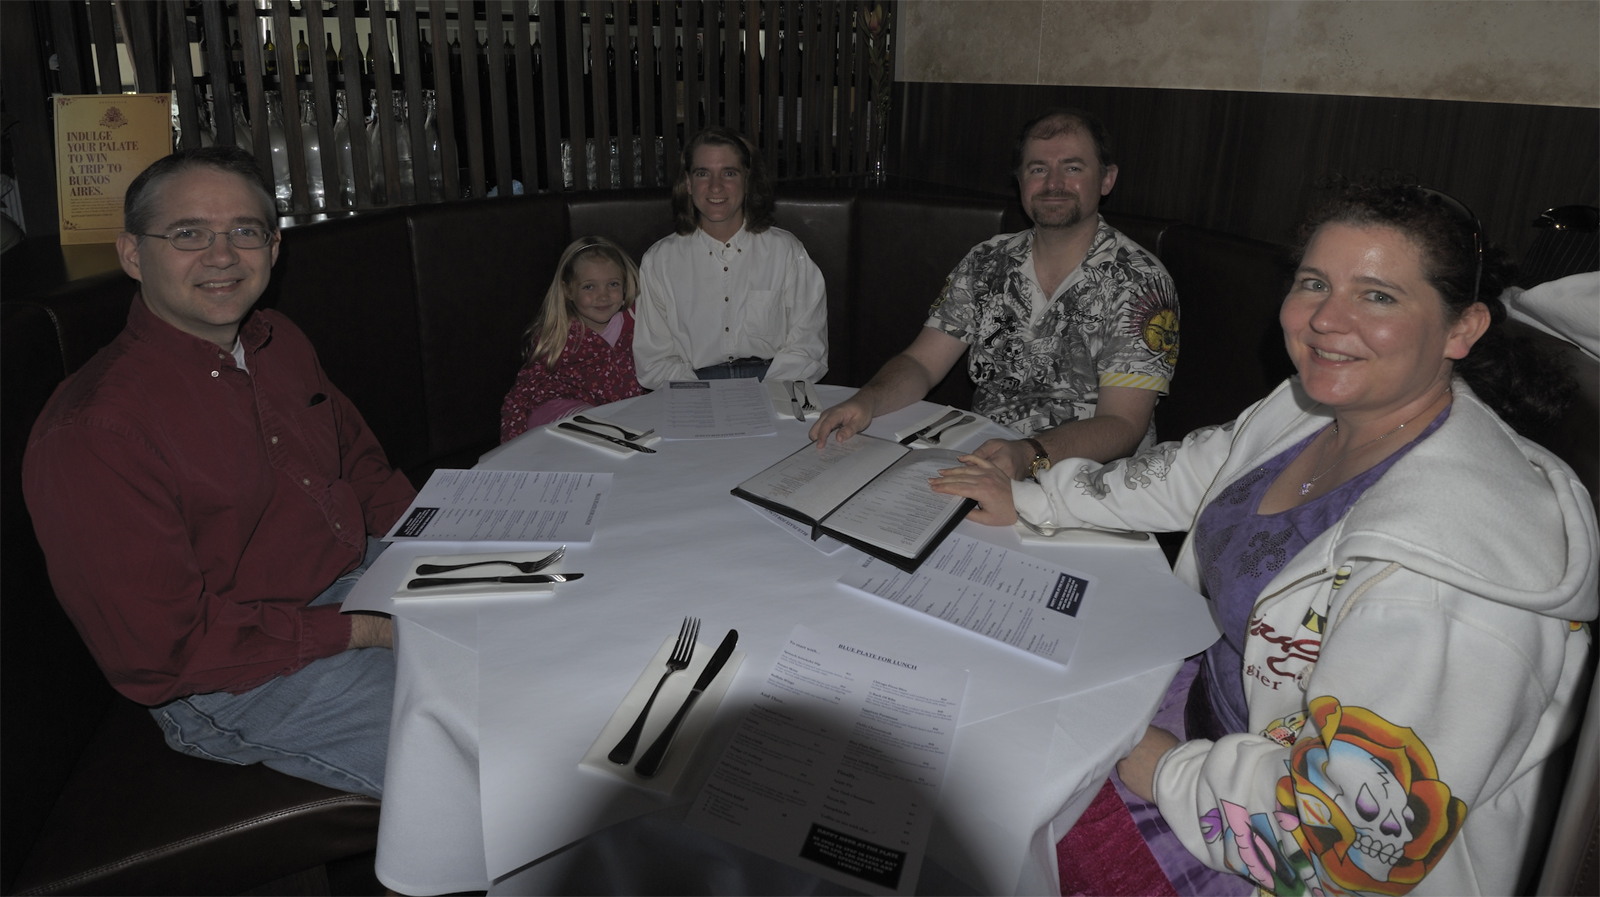 Robert, Noelle, Carol, Steve and Jackie about ot eat Jackie's Birthday meal at the BLUE PLATE BAR & GRILL®